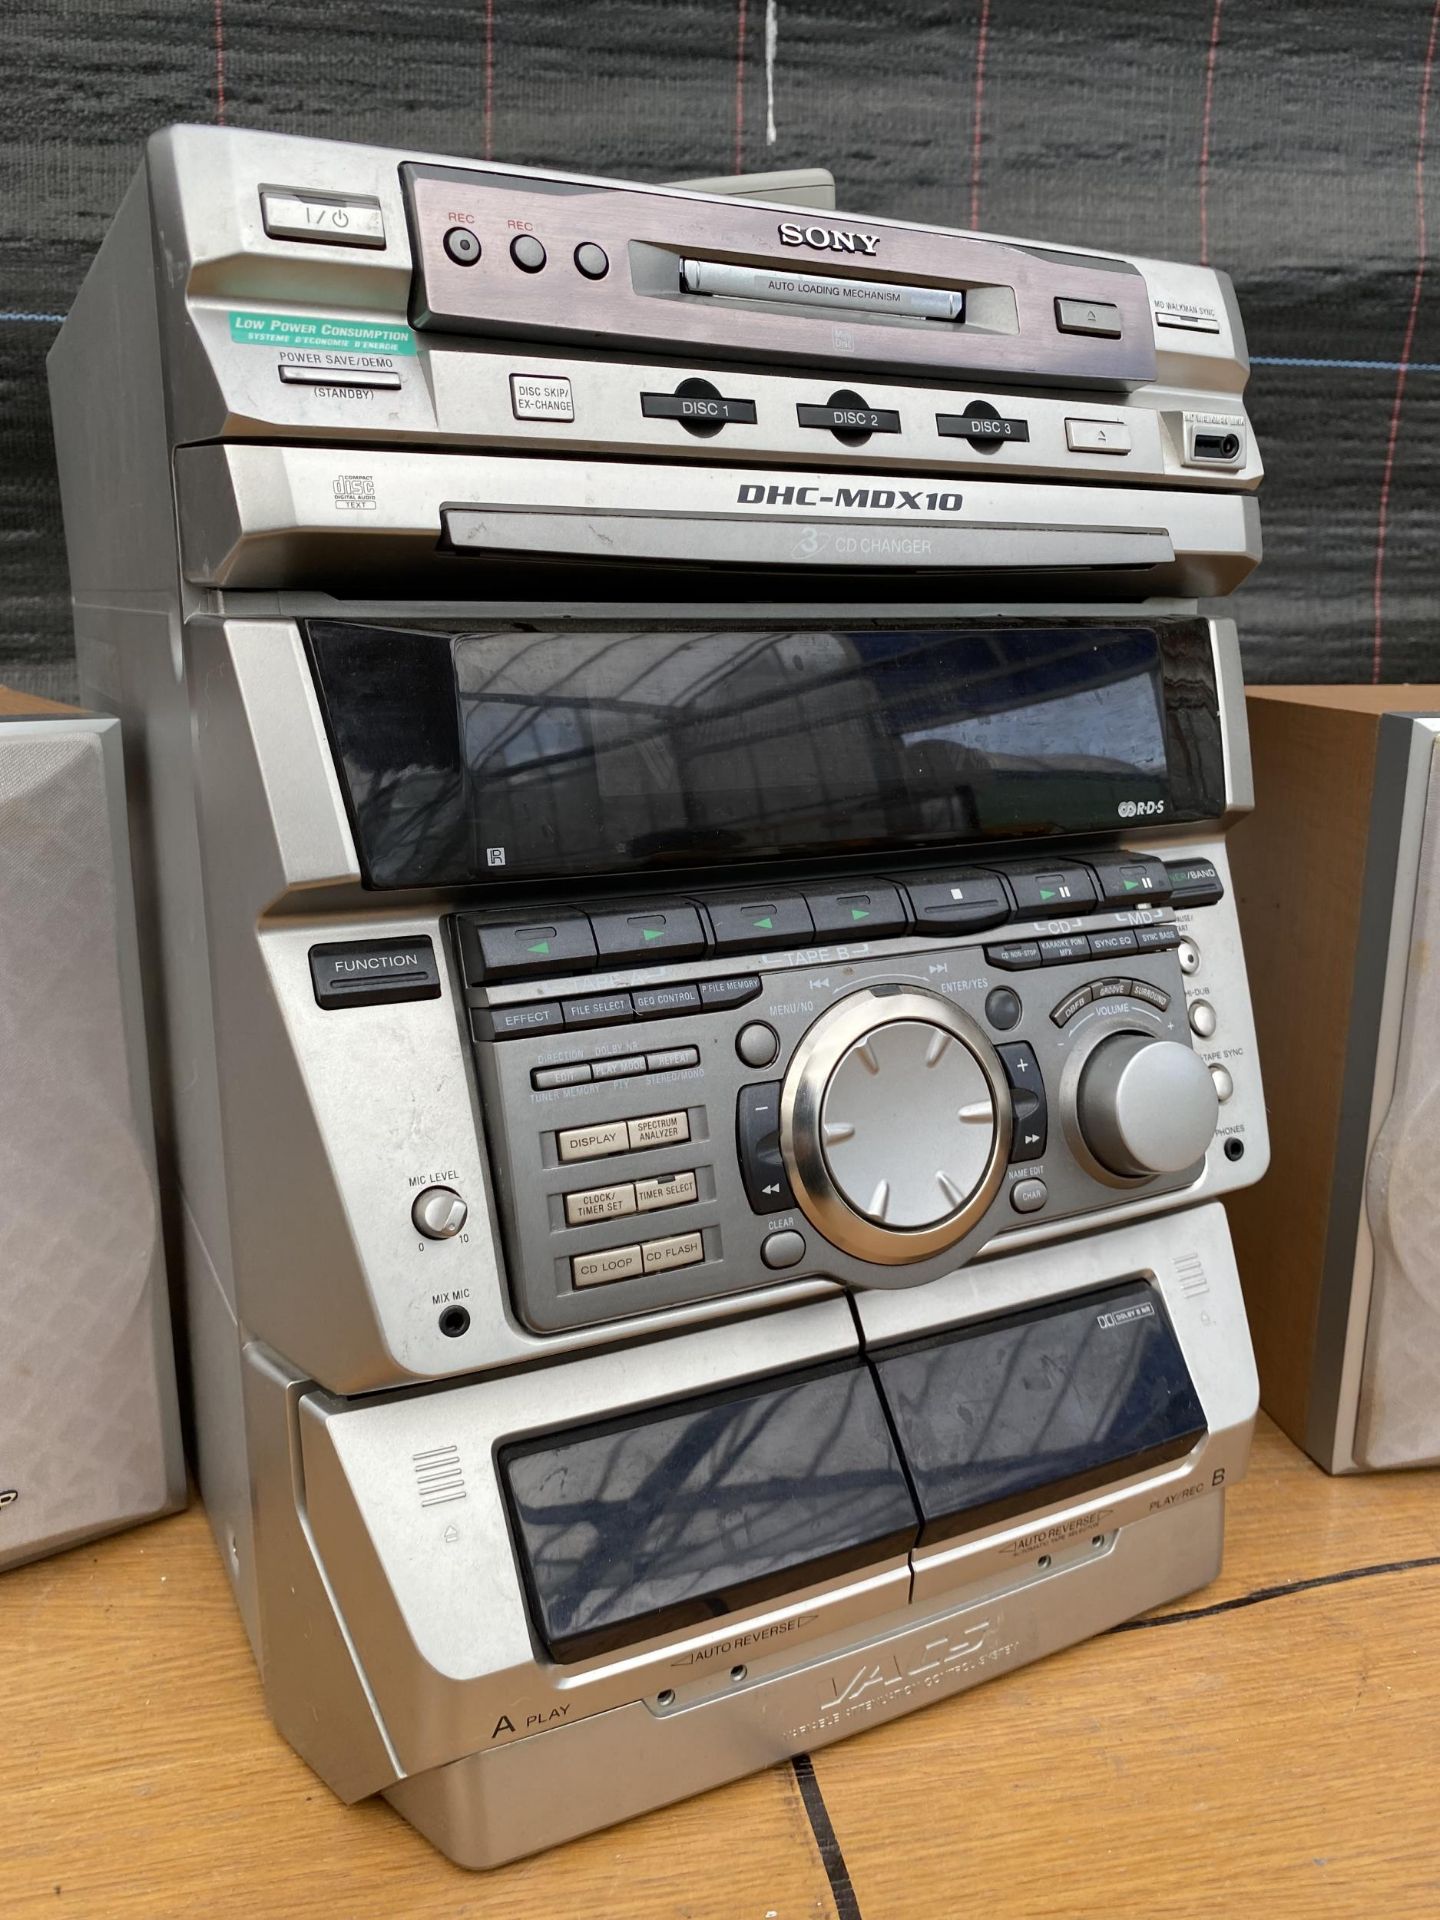 A SONY STEREO SYSTEM WITH 3 CD CHANGER, TAPE DECK AND TWO SHARP SPEAKERS - Image 2 of 2